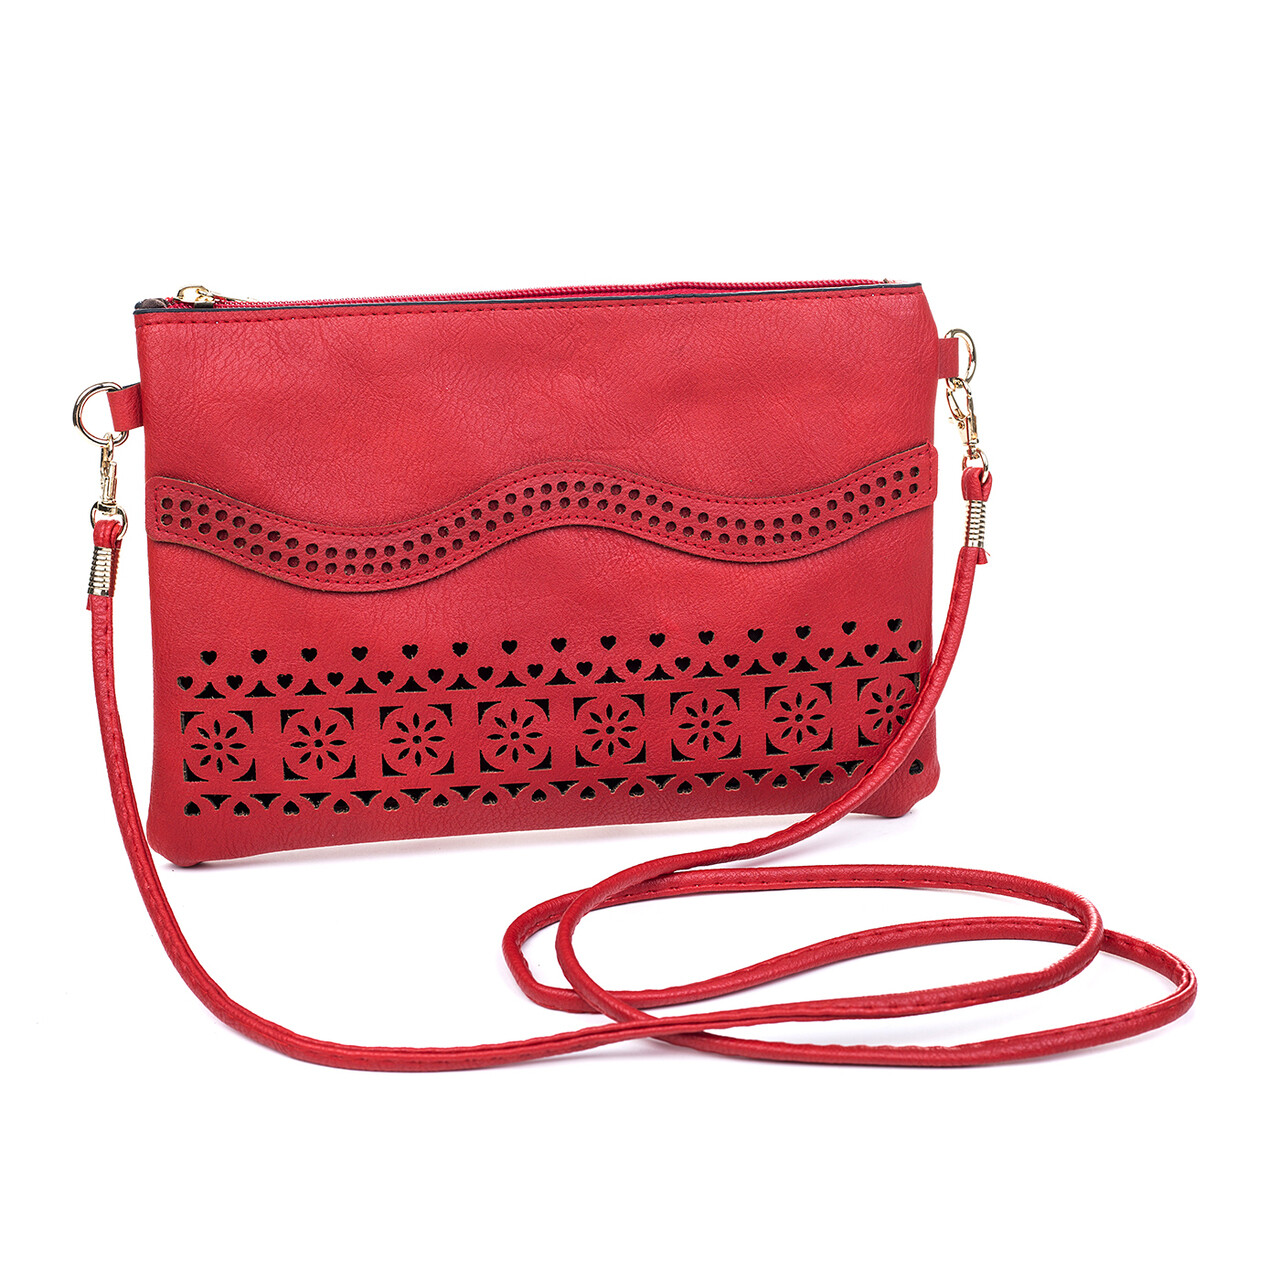 Red Shoulder Bag with Phone Compartment